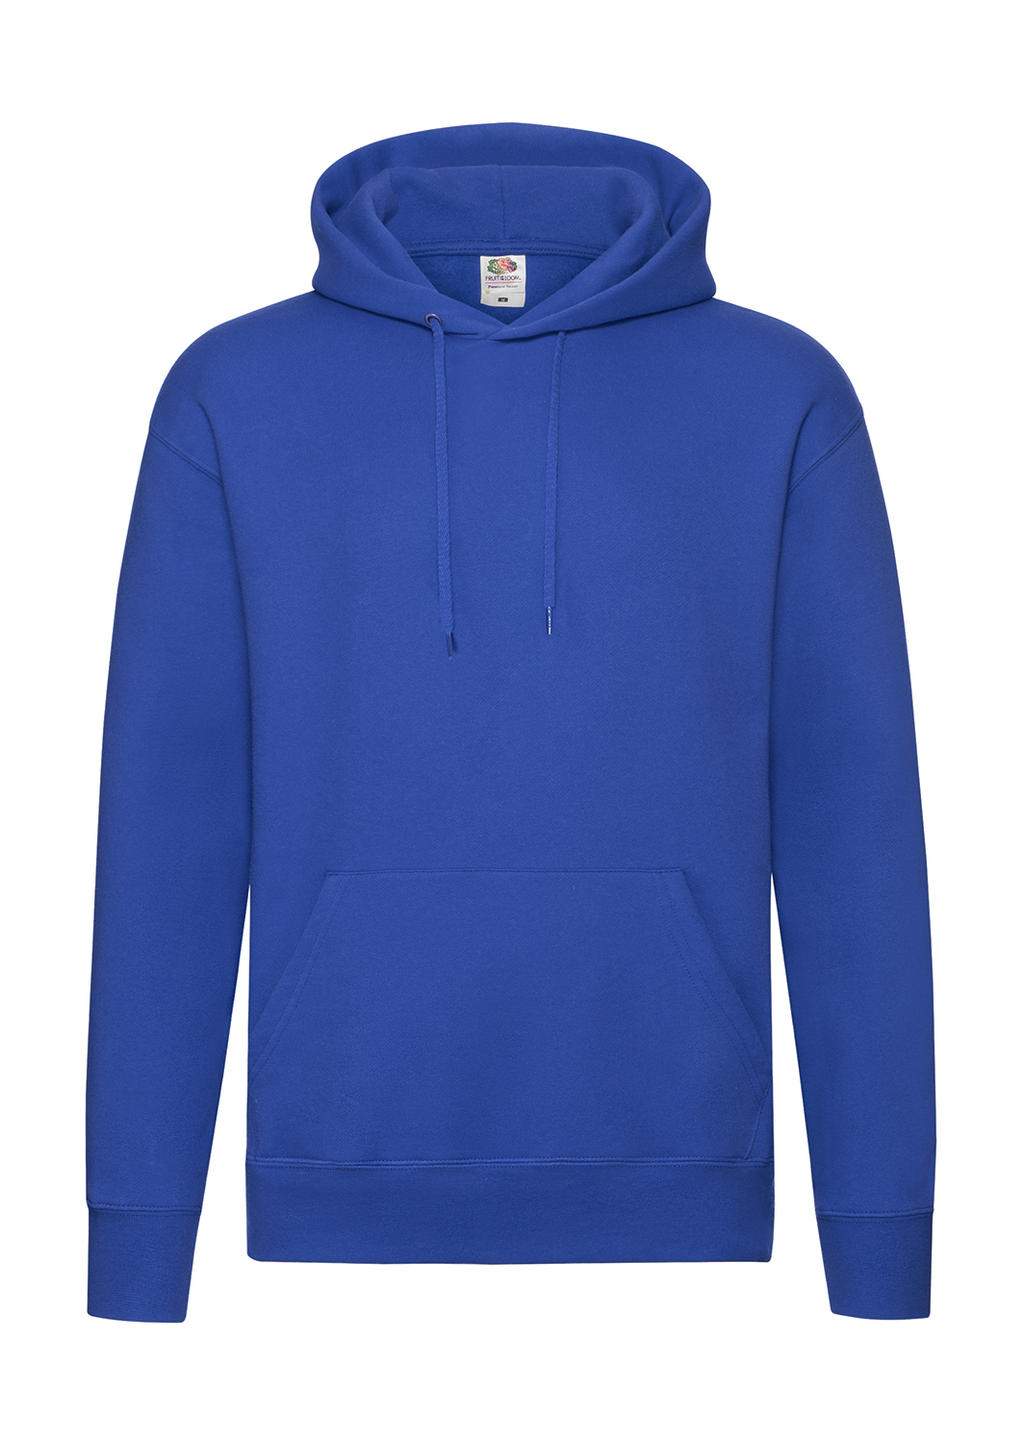  Premium Hooded Sweat in Farbe Royal Blue